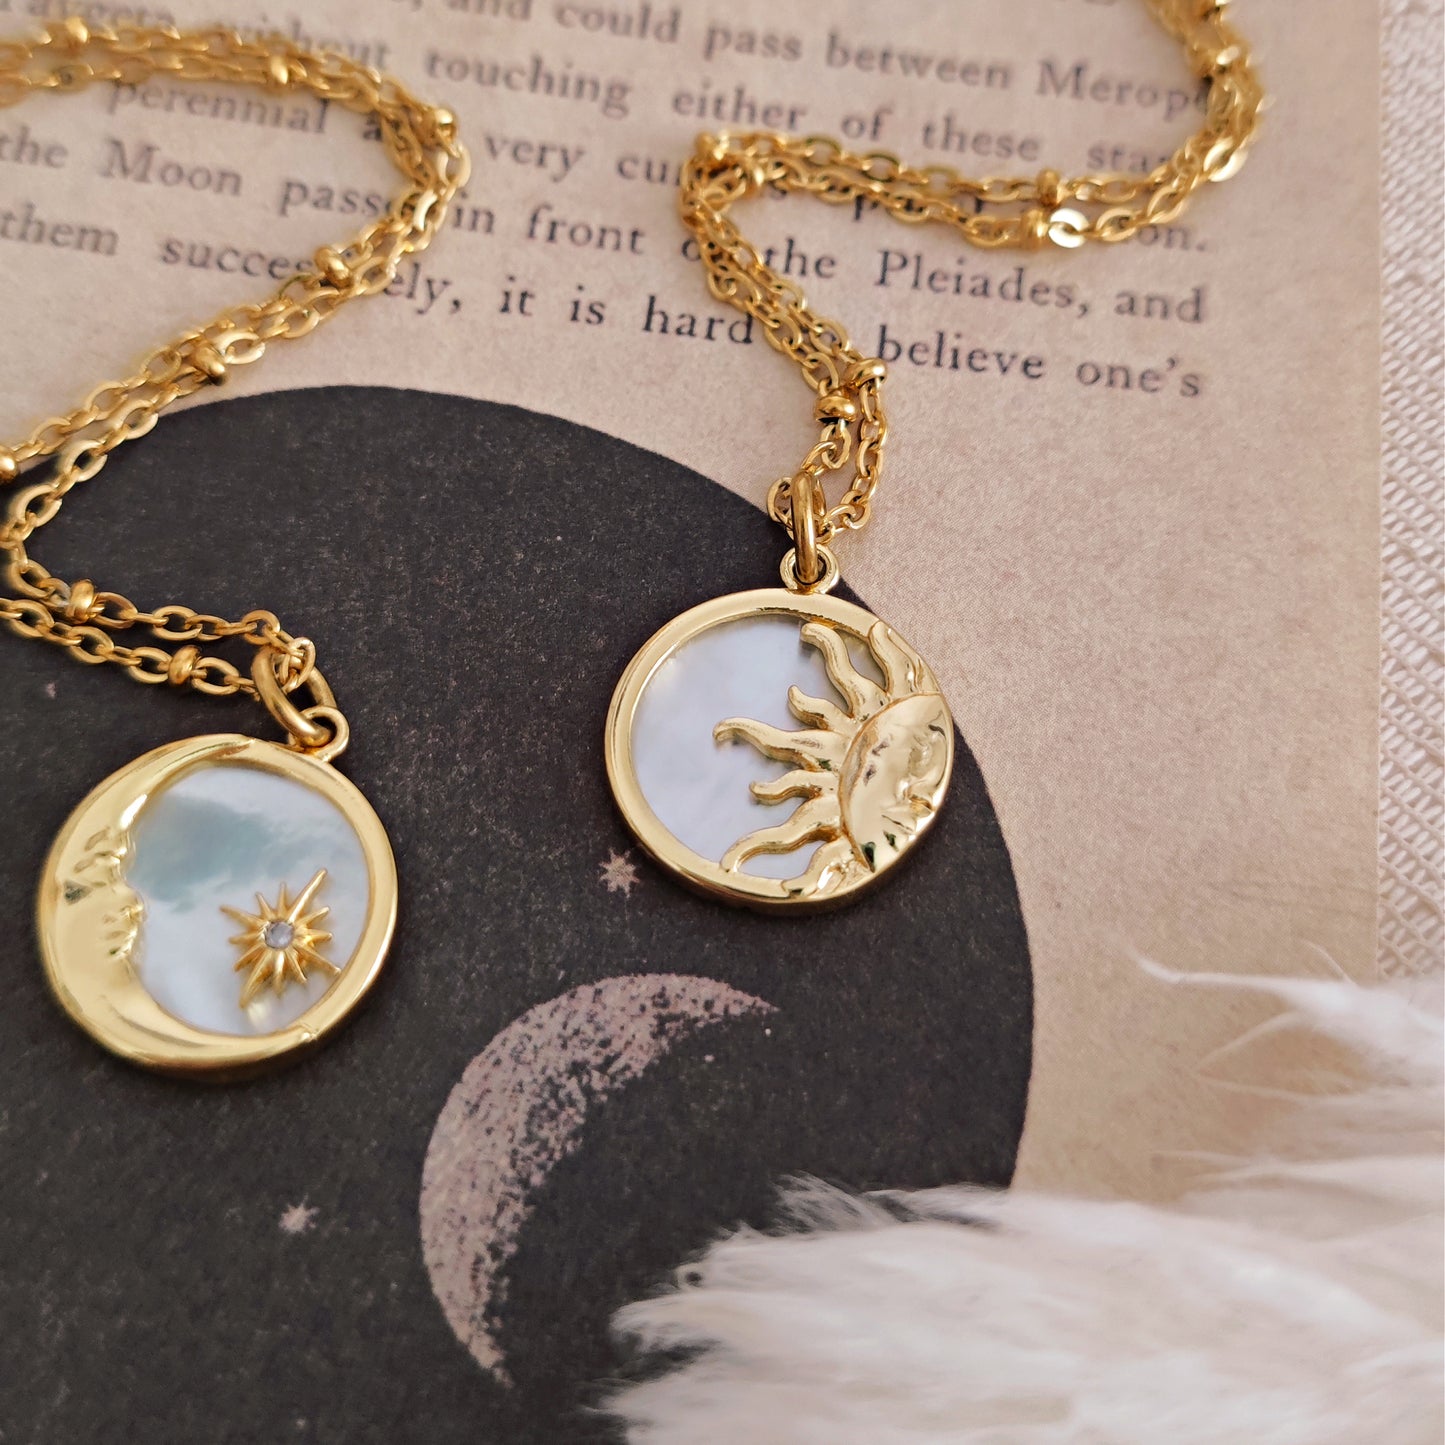 Gold Plated Sun and Moon Pendant Necklaces, Stars & Celestial Necklaces, Mother of Pearl Dainty Necklace 